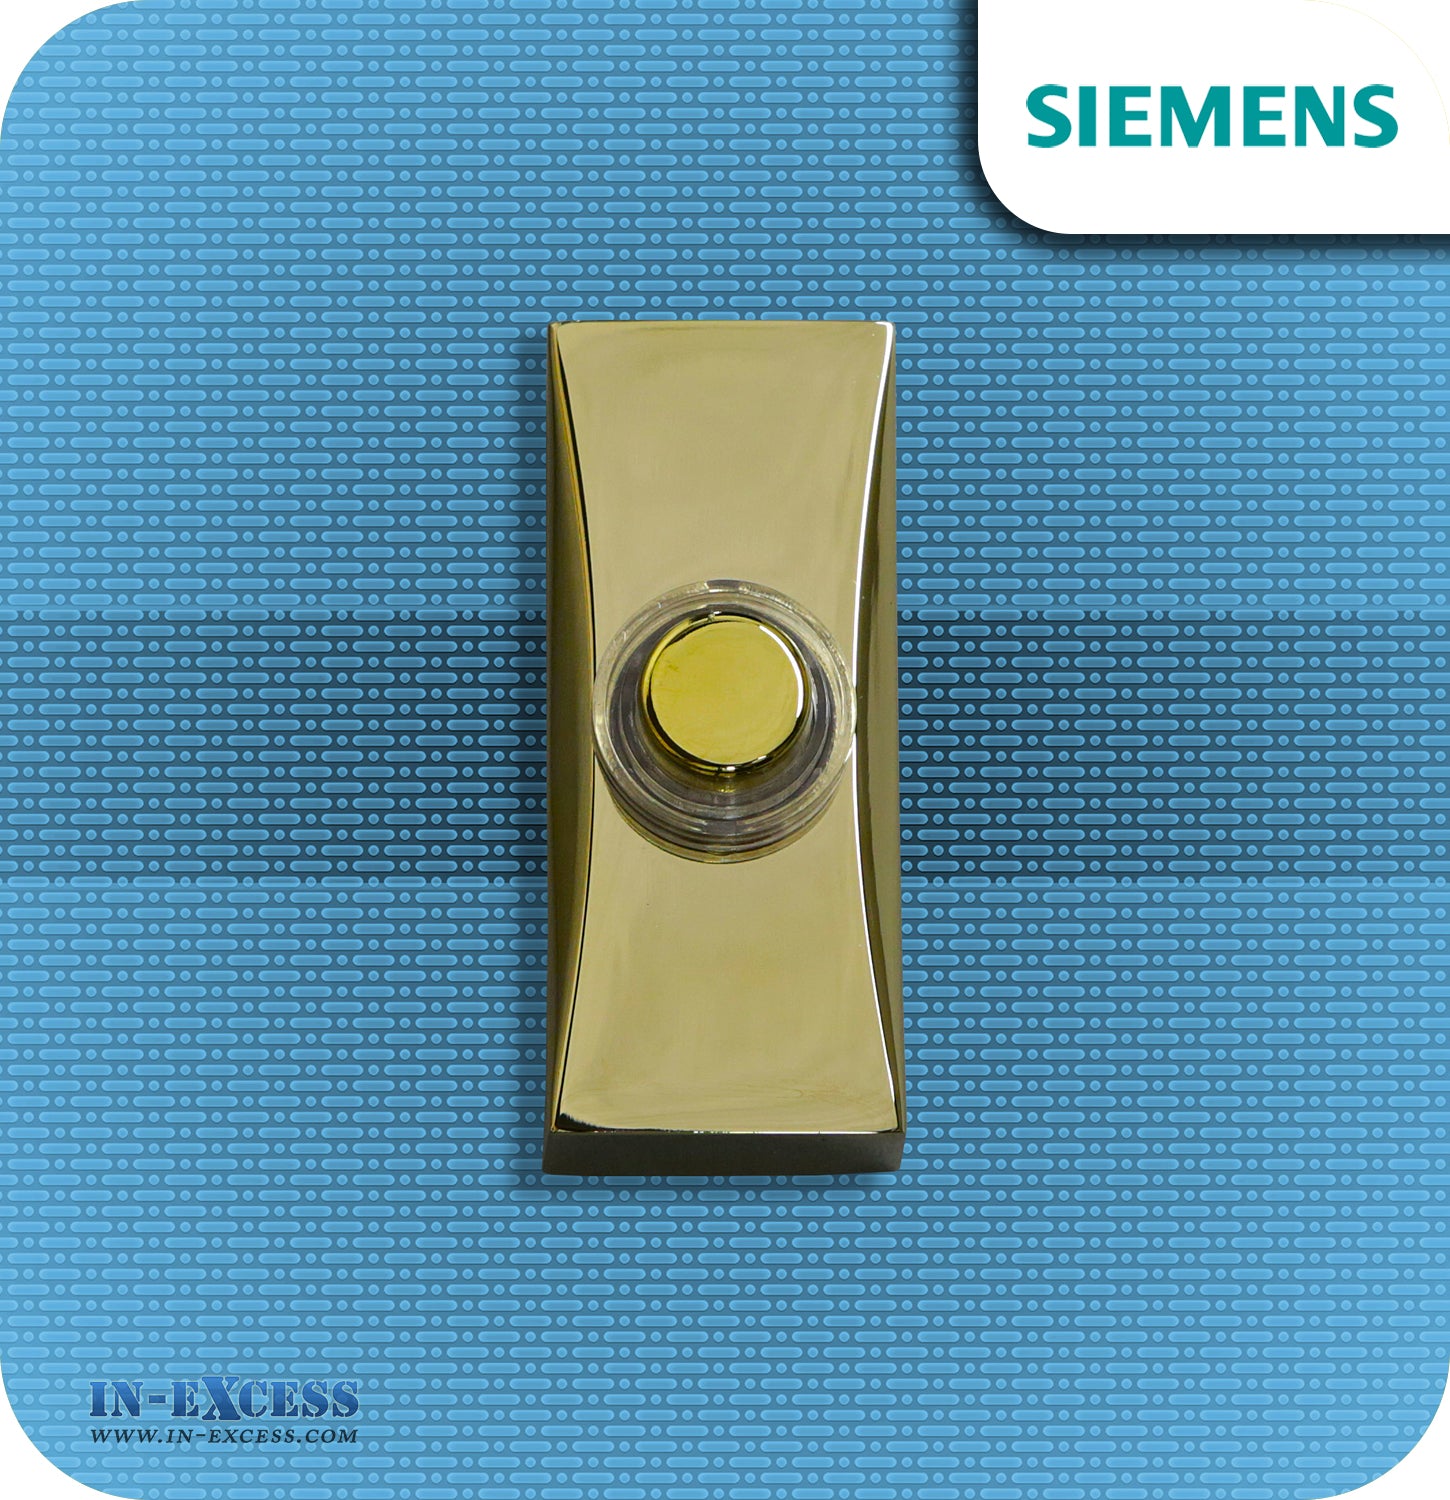 Siemens Brass Effect Wired Bell Push For Wired Door Chimes - JSJS-312